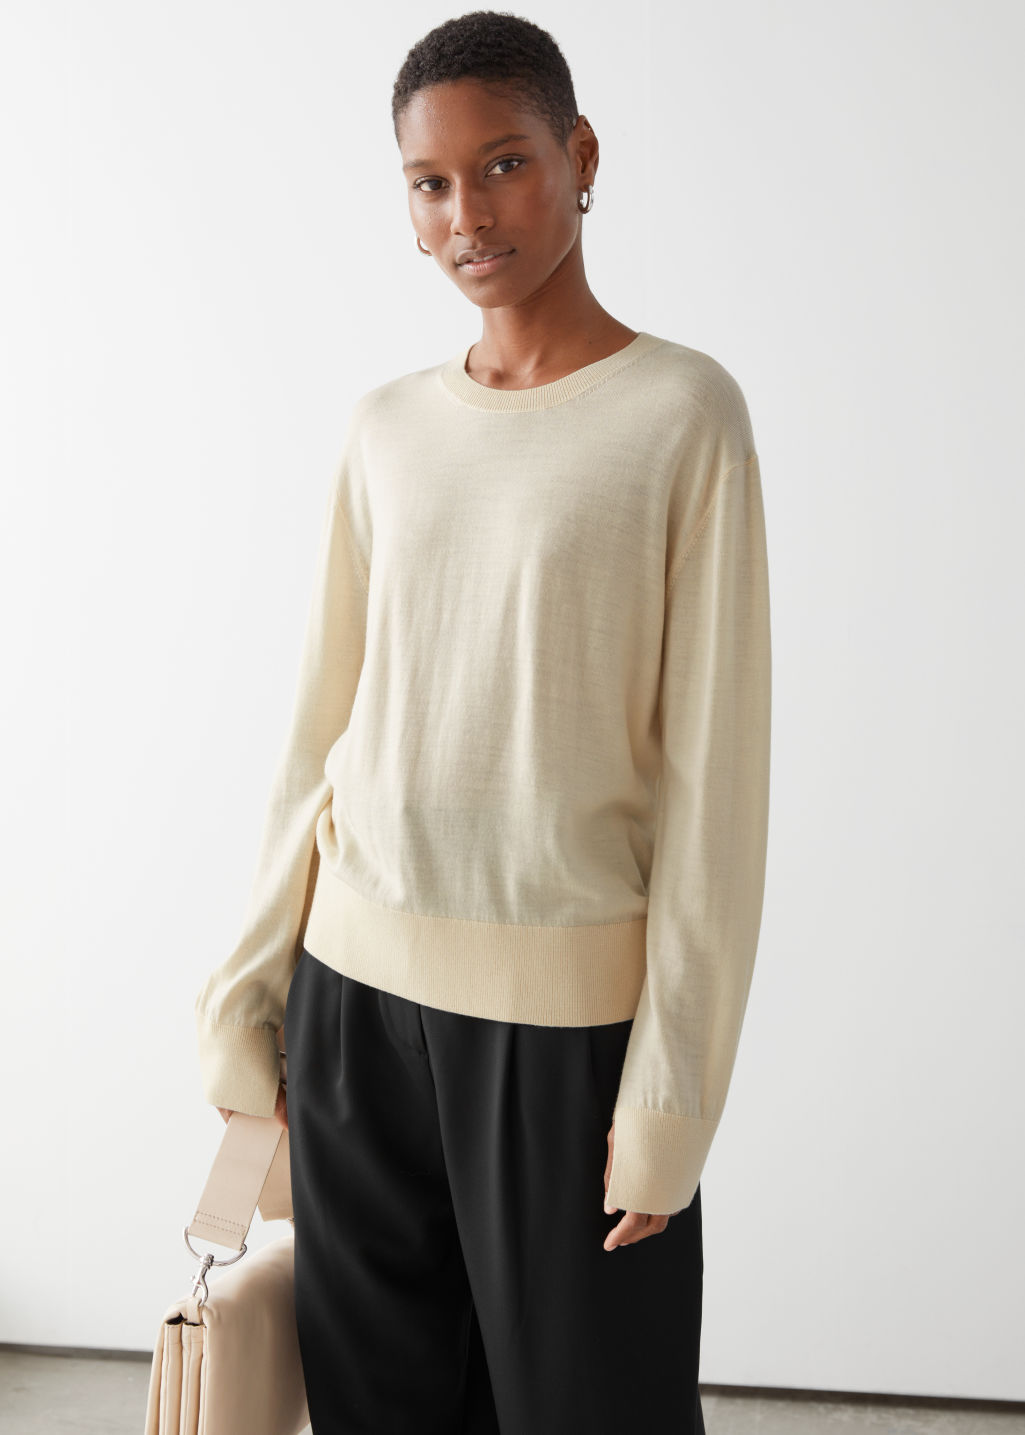 Slit Cuff Wool Knit Sweater - Black - Sweaters - & Other Stories